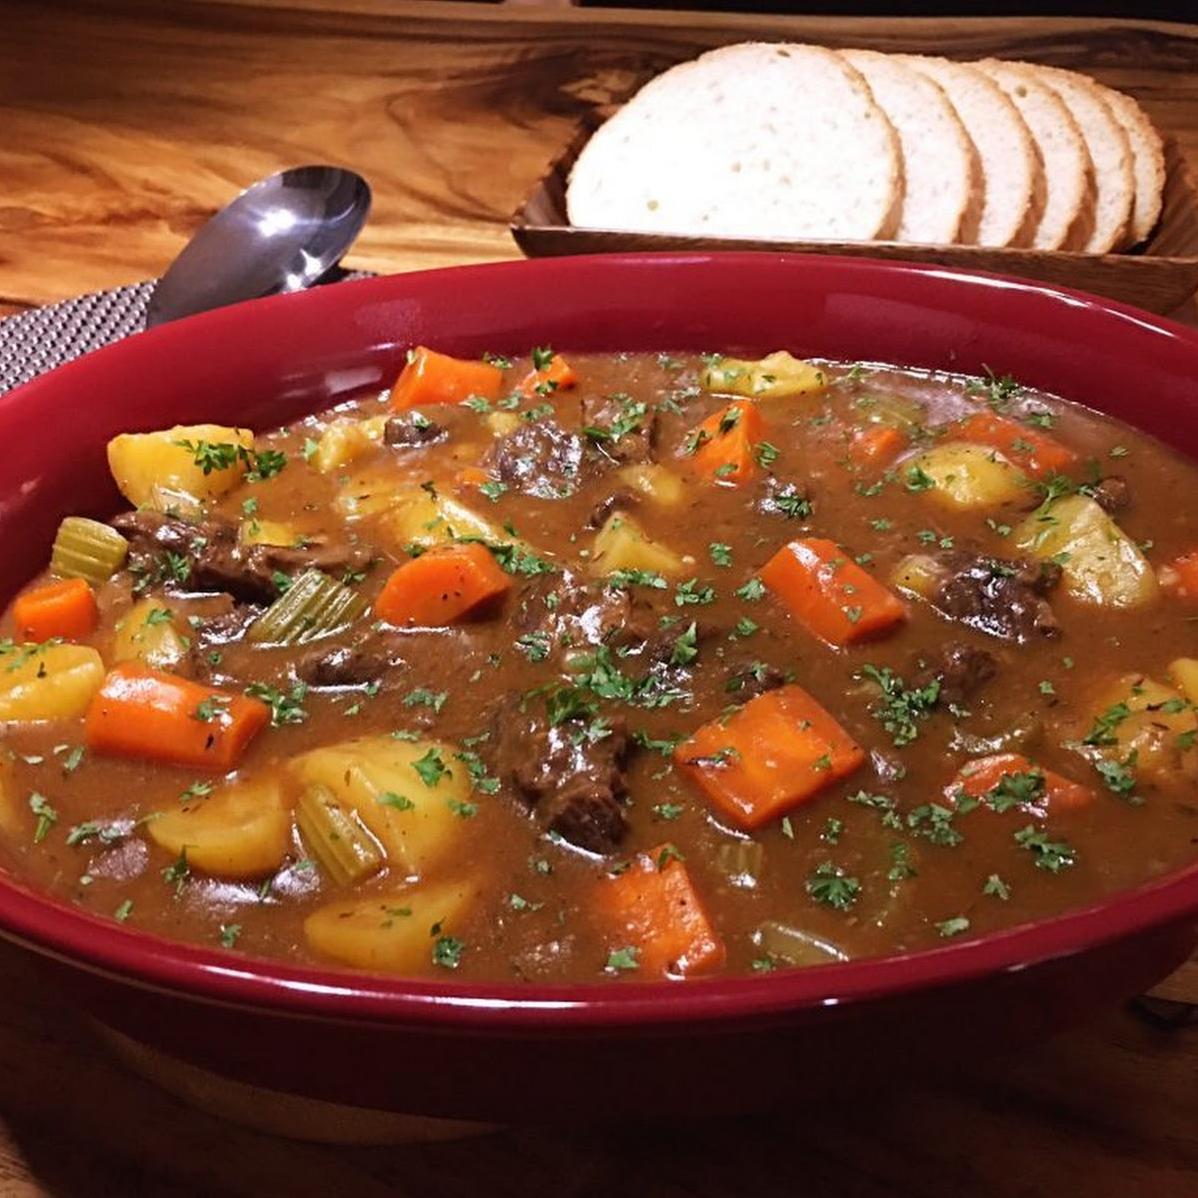  The depth of flavor from the coffee gravy takes this stew to the next level.